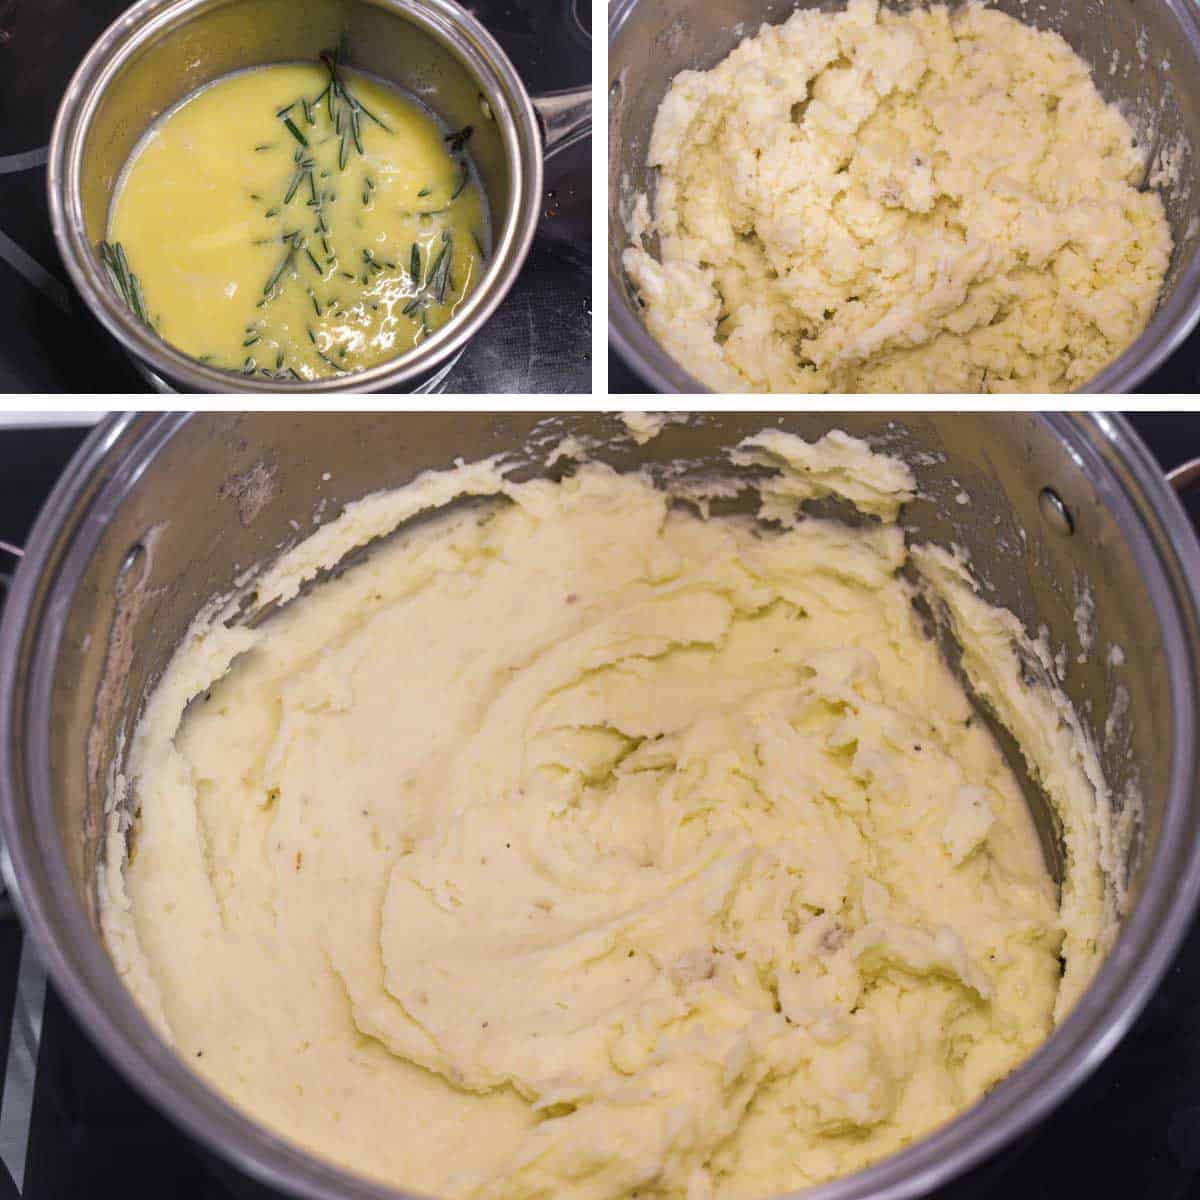 process shots of infusing milk and butter with rosemary before mashing potatoes and adding the rest of the ingredients